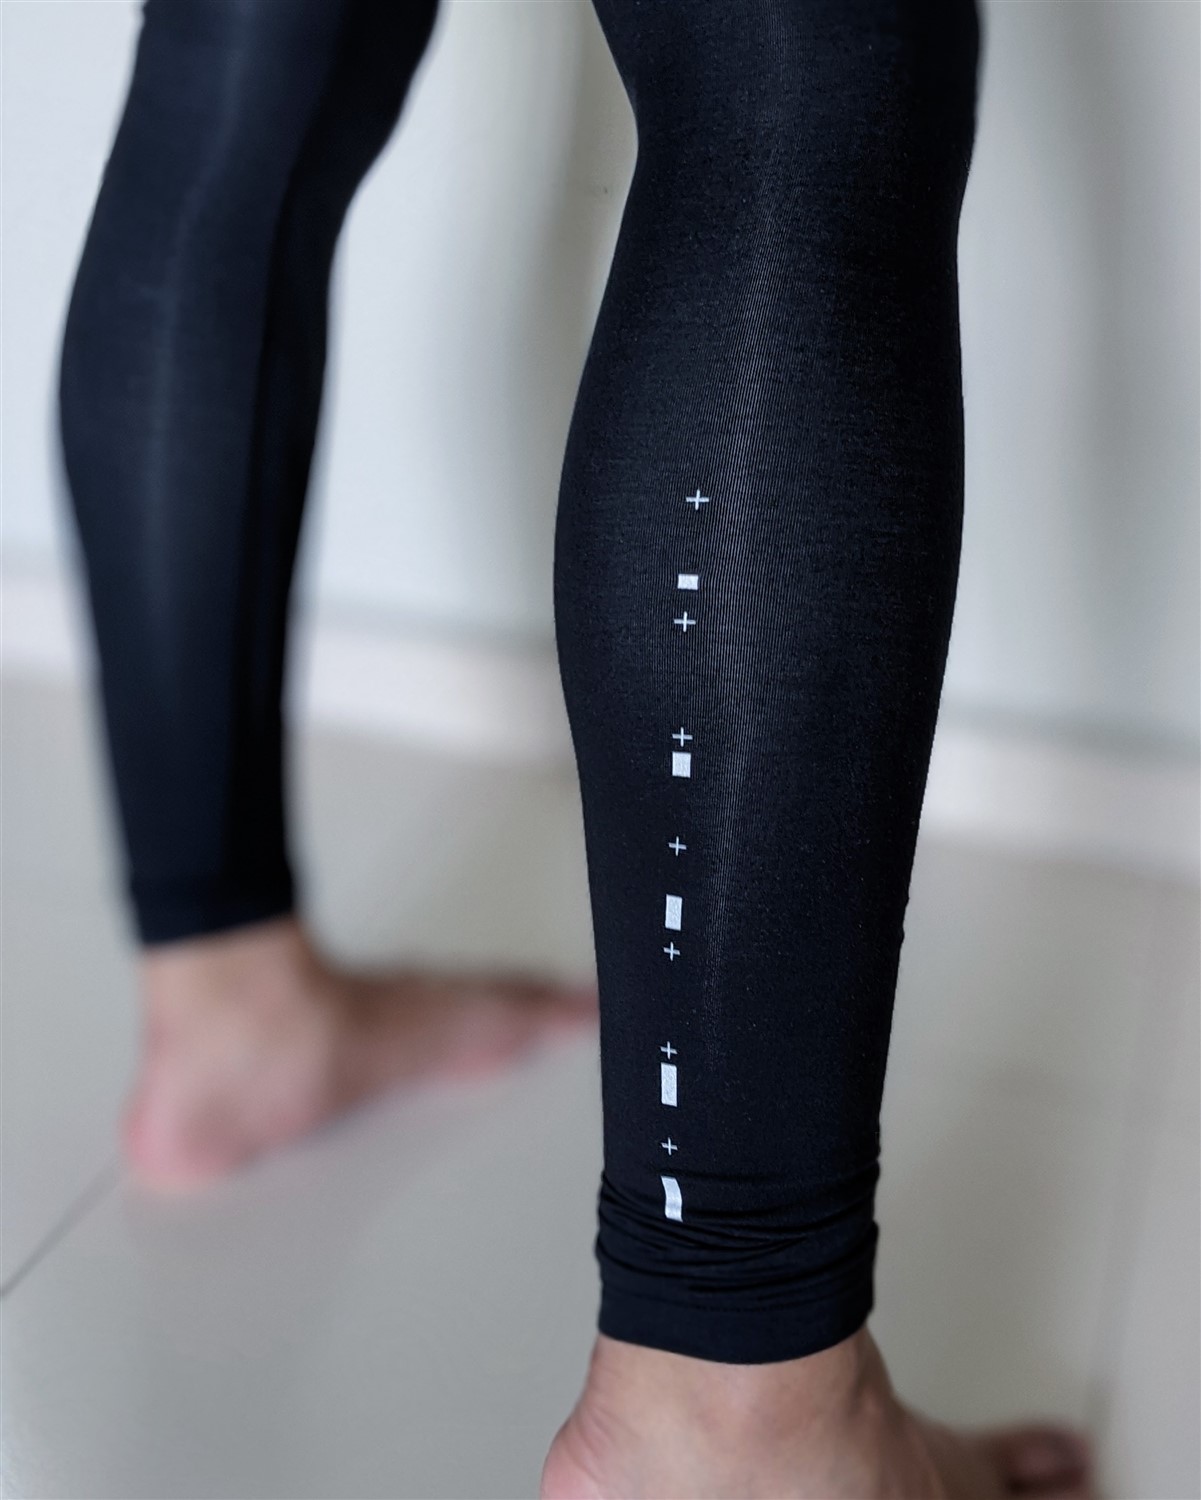 Under Armour RECOVER Sleepwear and Compression